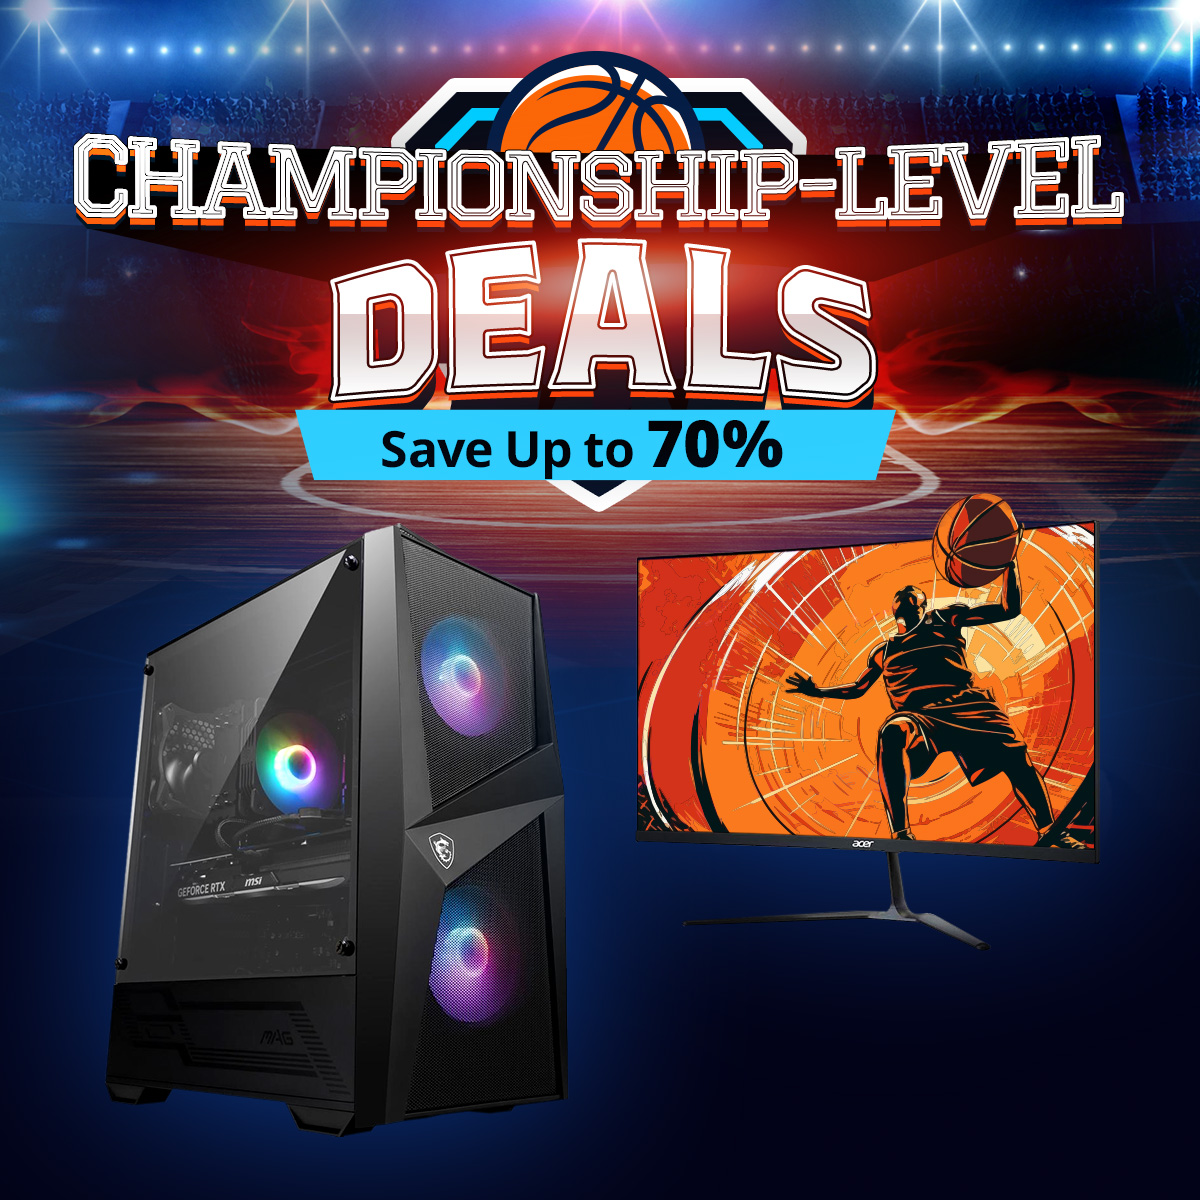 Ready to win the tech game? Our Championship Level Deals are here! Save up to 70% off on desktops, laptops and computer components Don’t miss out on these great deals! What’s the deal you are looking for?
#Newegg #TechSale #MarchMadness

newegg.io/X-Champion-0305